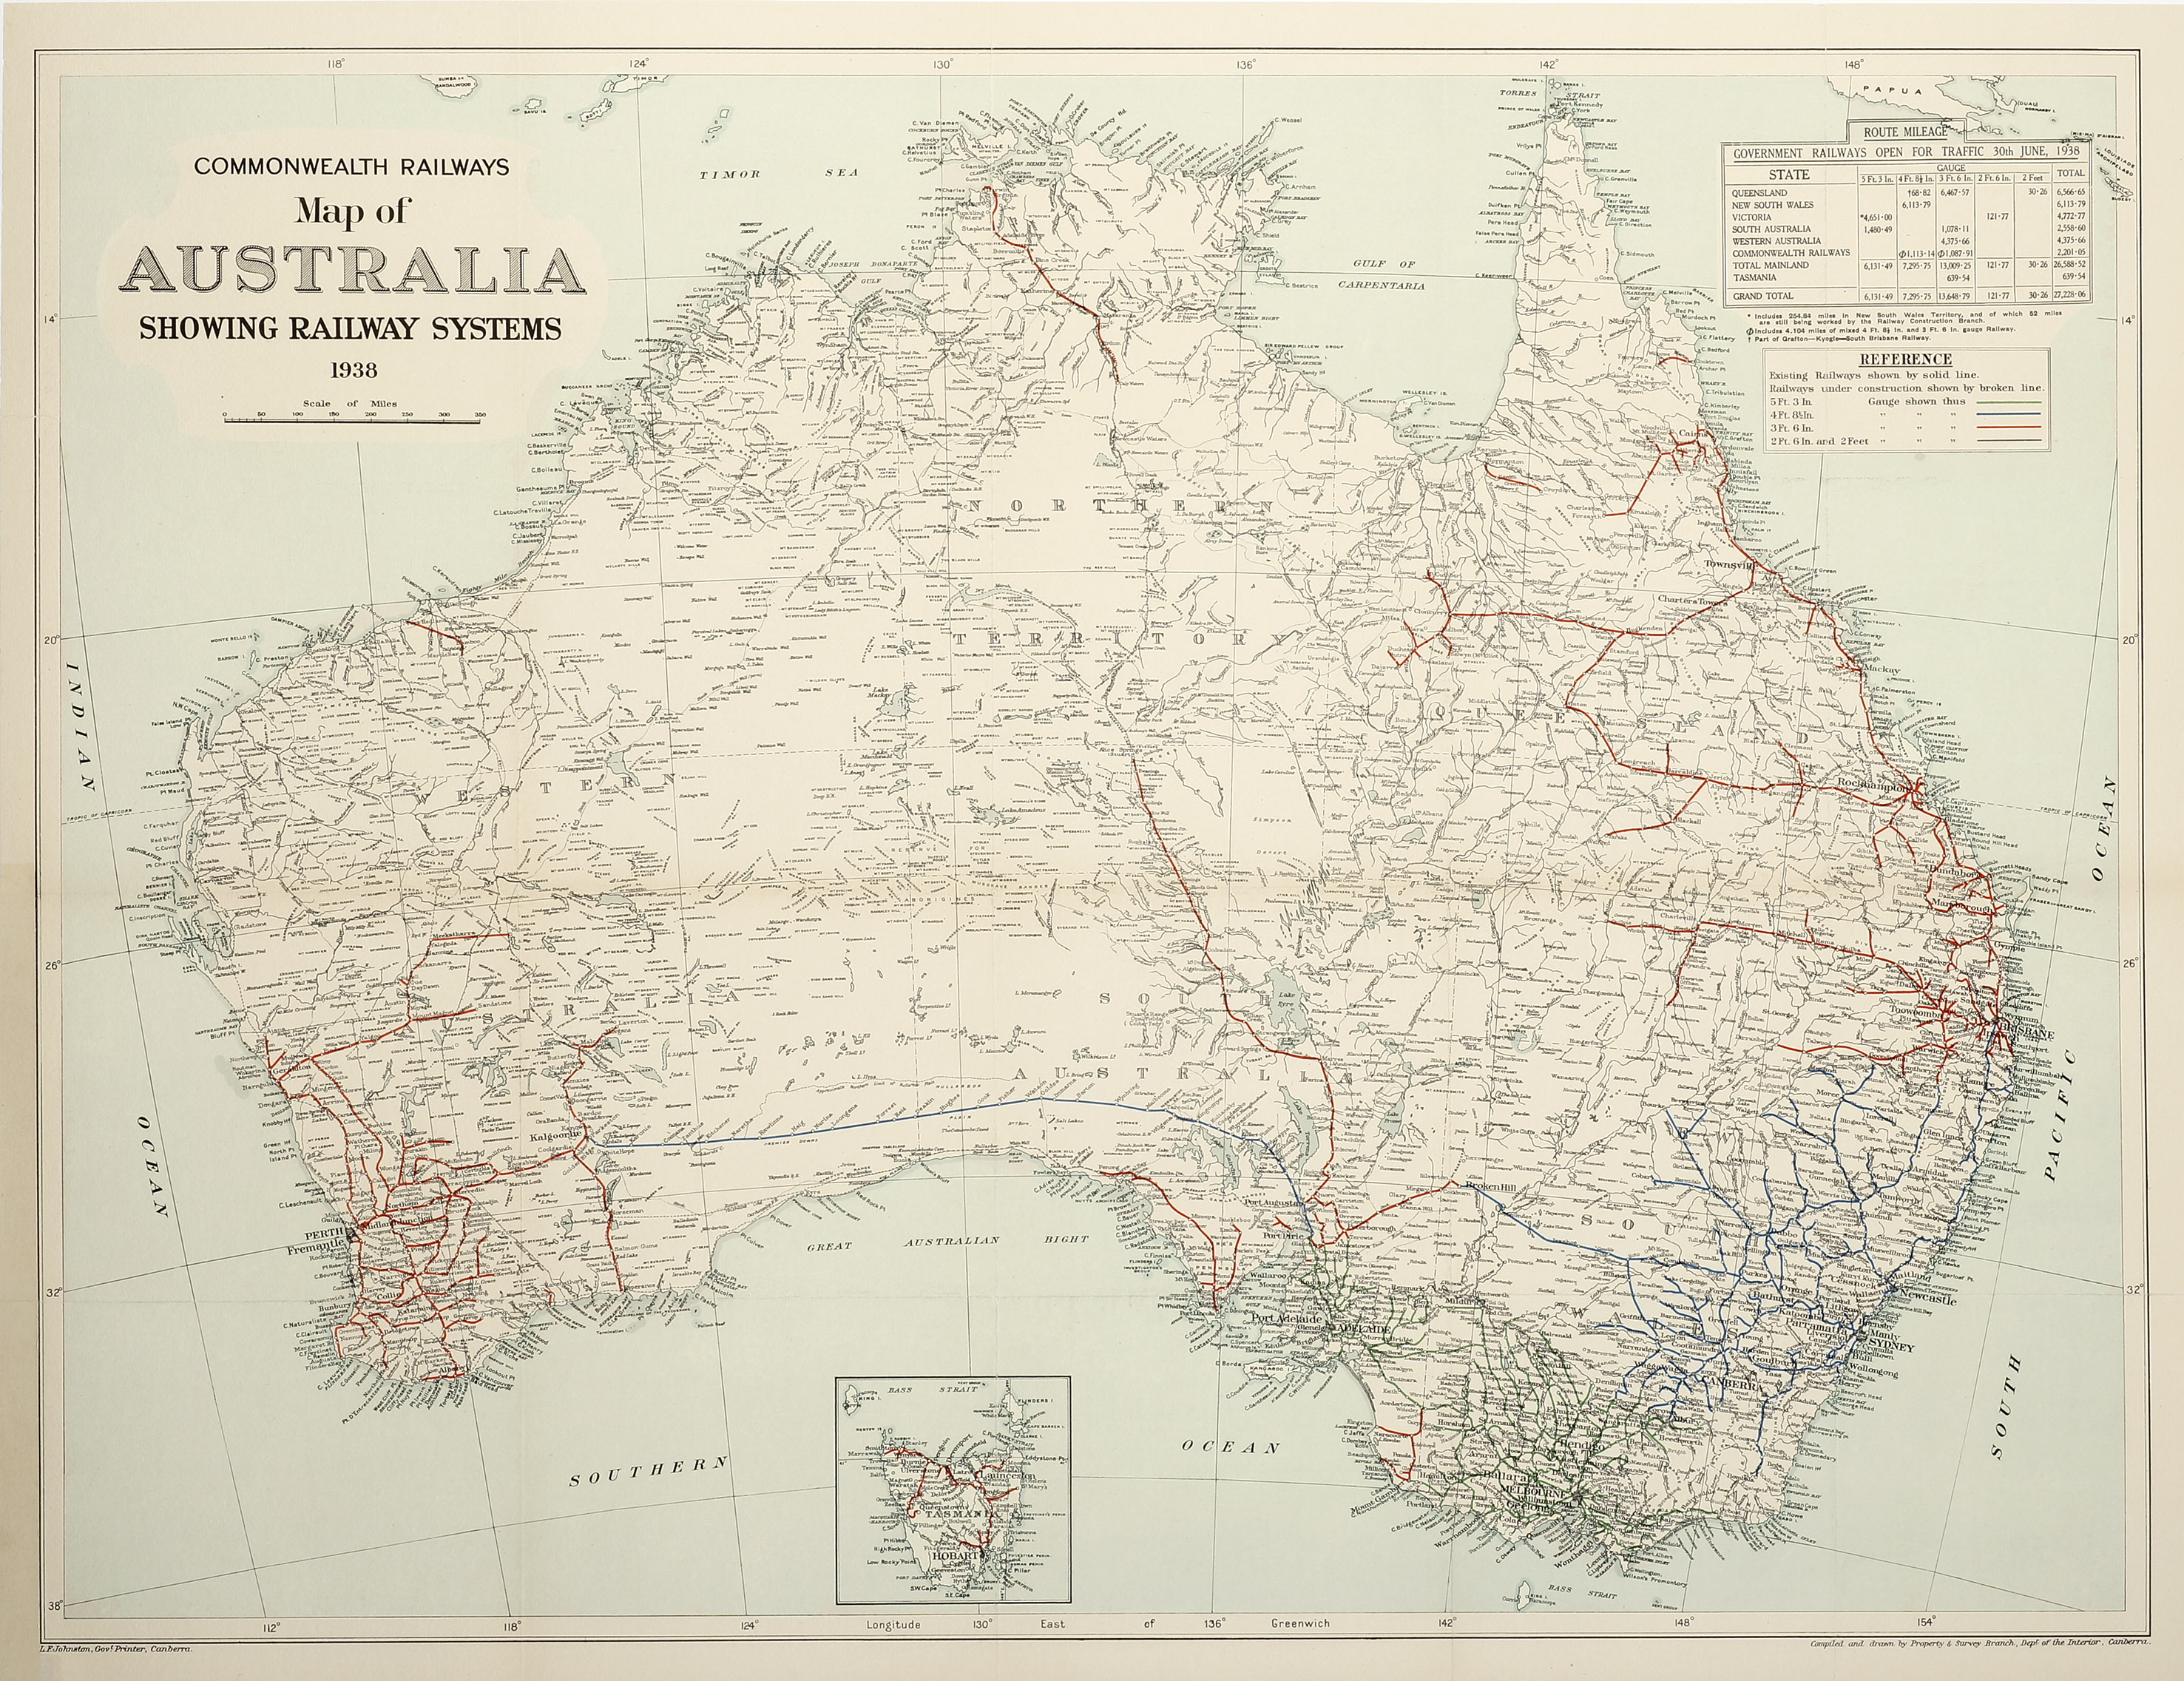 Commonwealth Railways Map of Australia Showing Railway Systems 1938 - Vintage Map from 1938